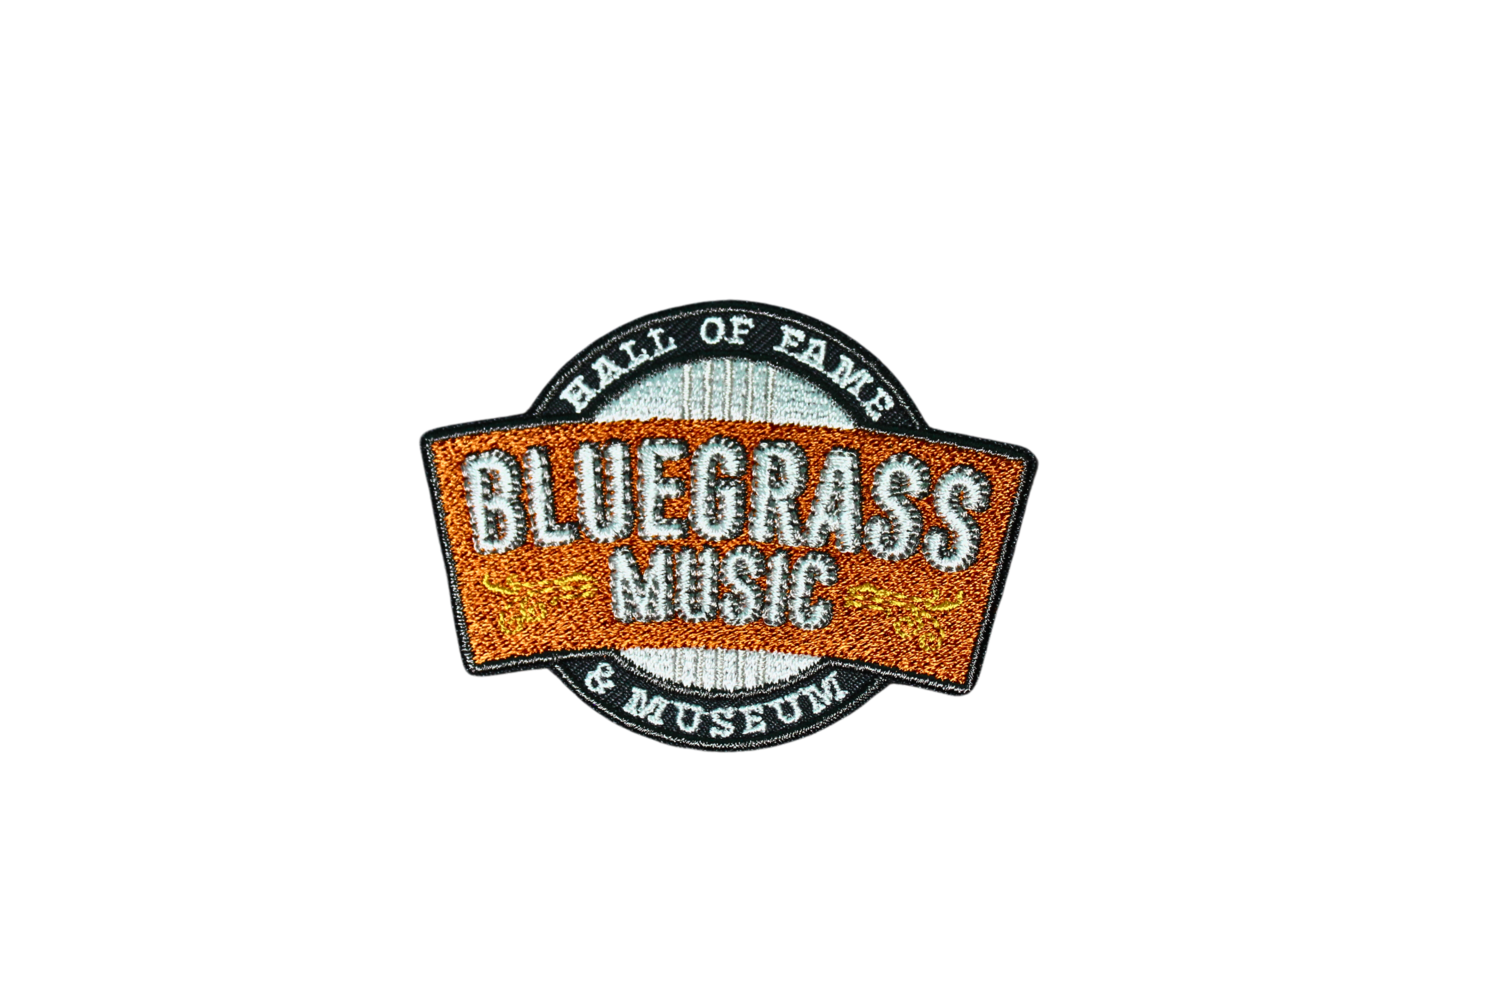 Bluegrass Music Hall of Fame Iron On Patch